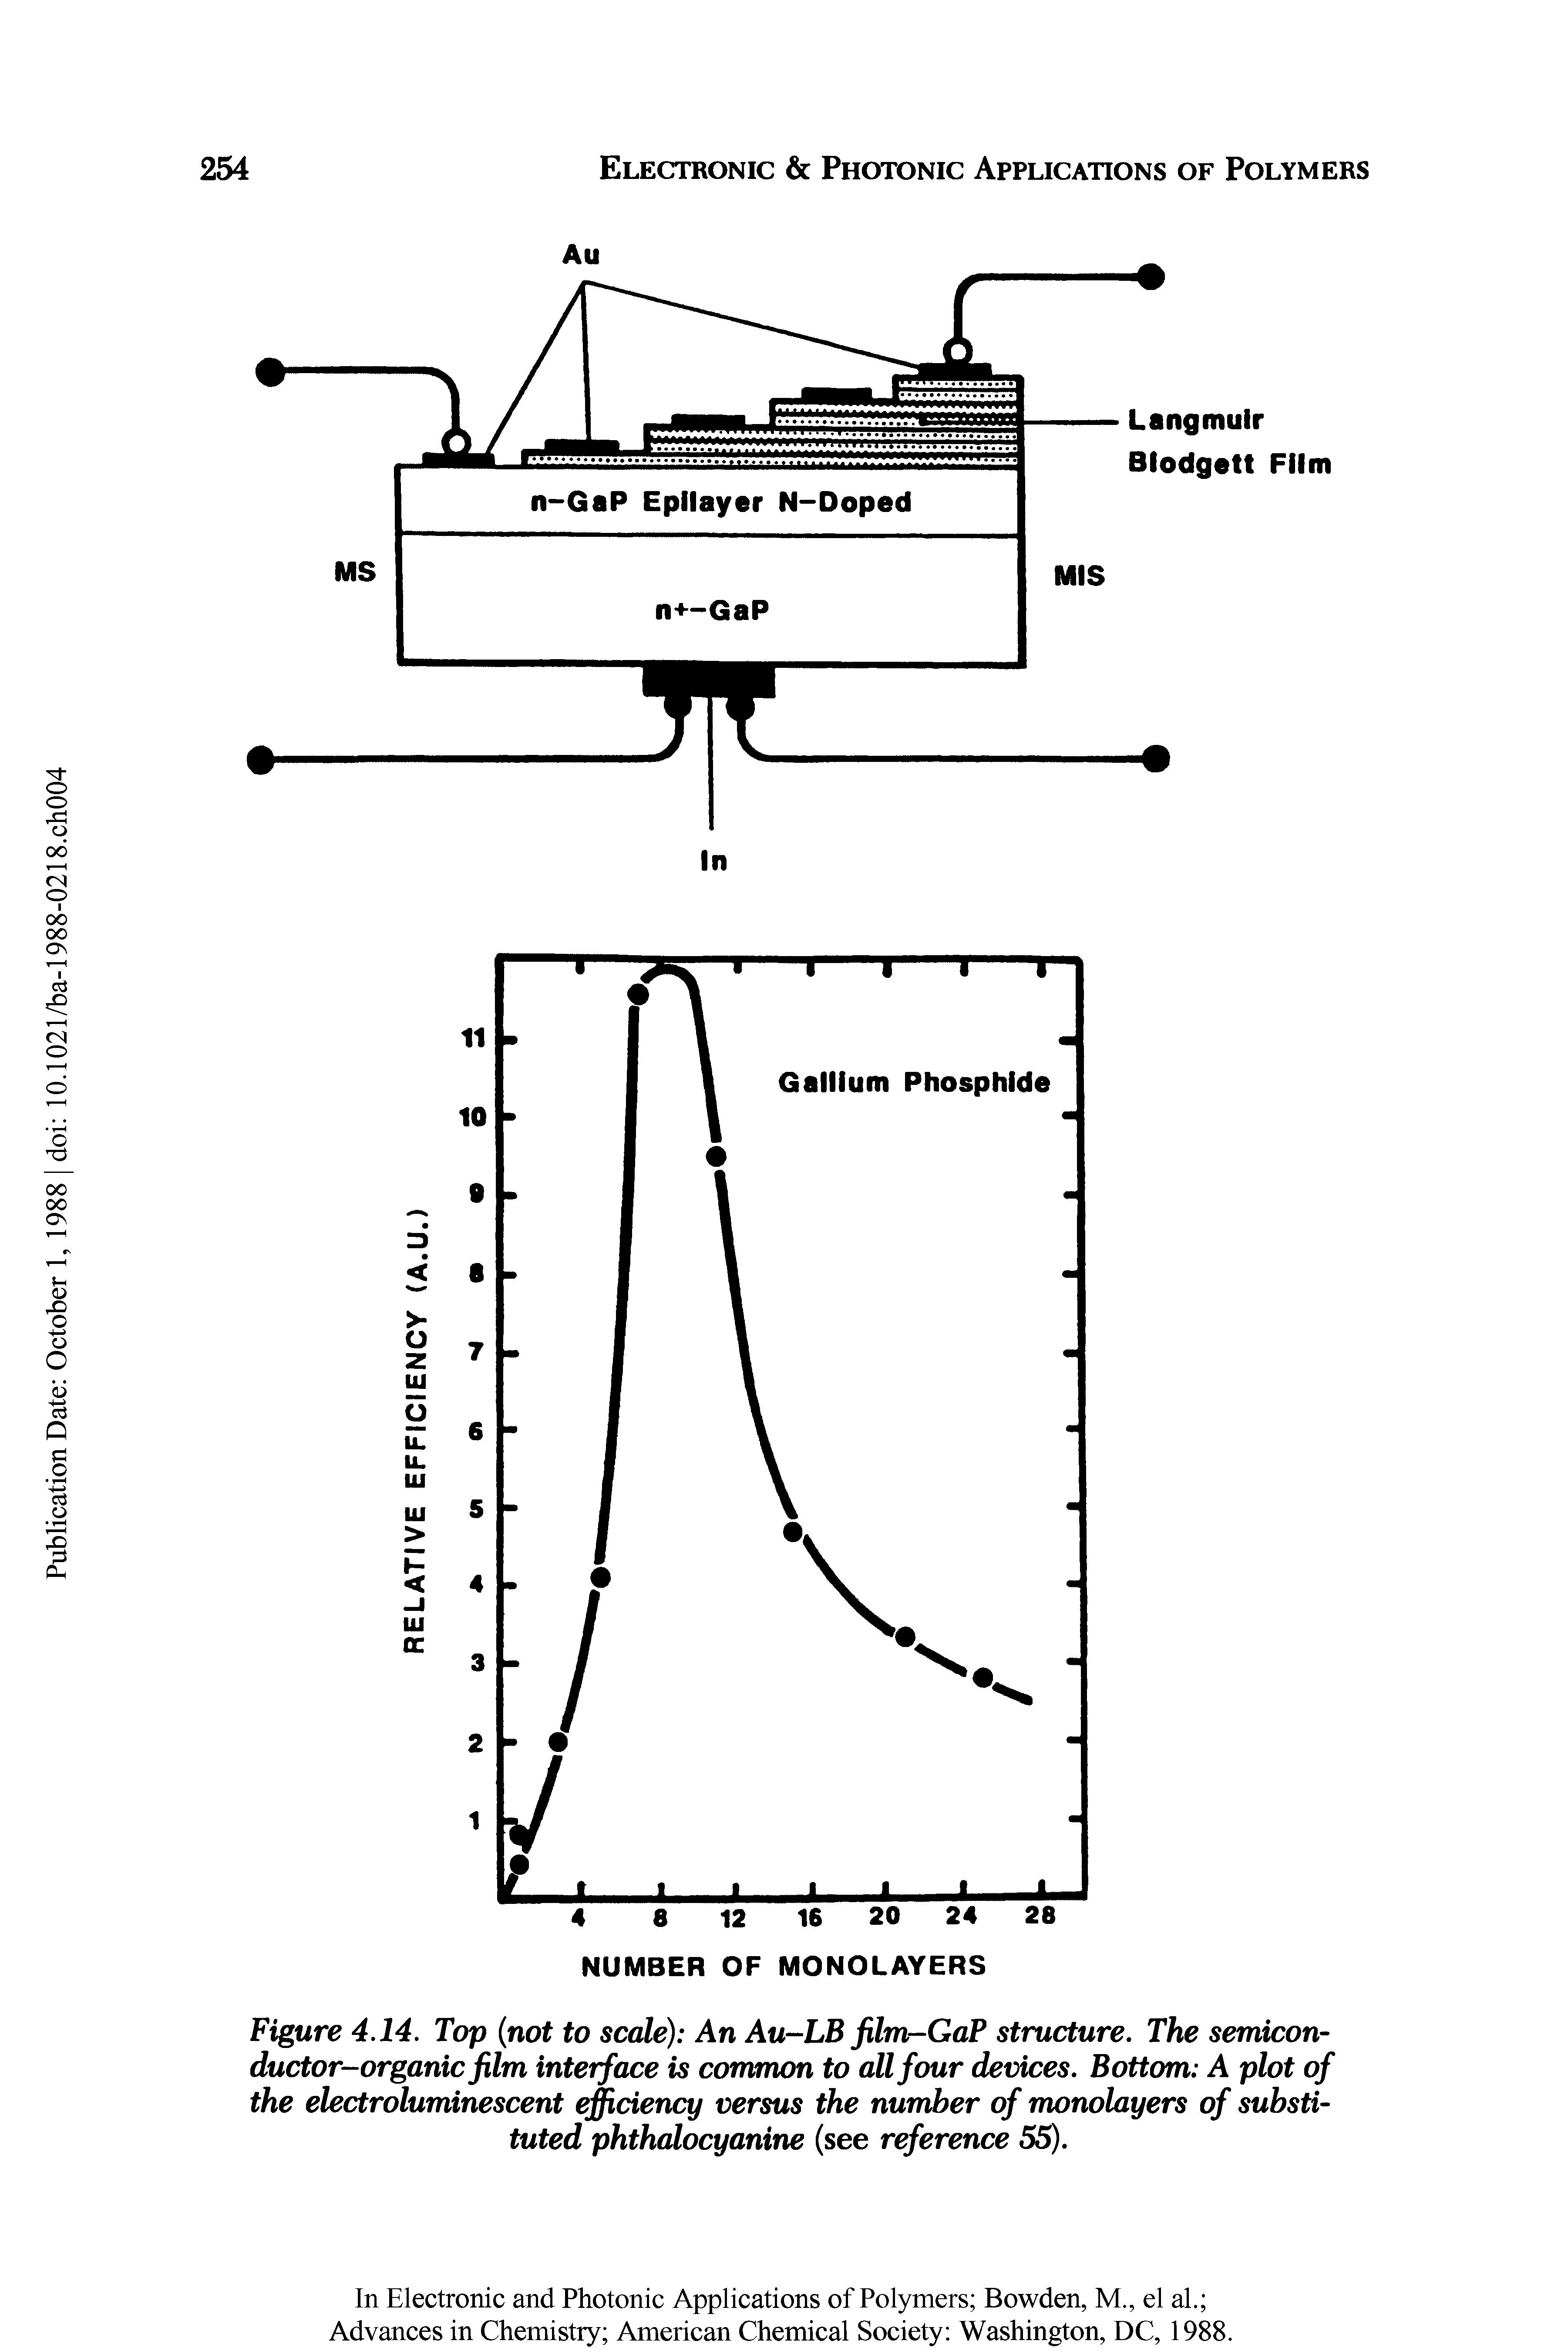 Figure 4.14. Top (not to scale) An Au-LB film-GaP structure. The semiconductor-organic film interface is common to all four devices. Bottom A plot of the electroluminescent efficiency versus the number of monolayers of substituted phthalocyanine (see reference 55).